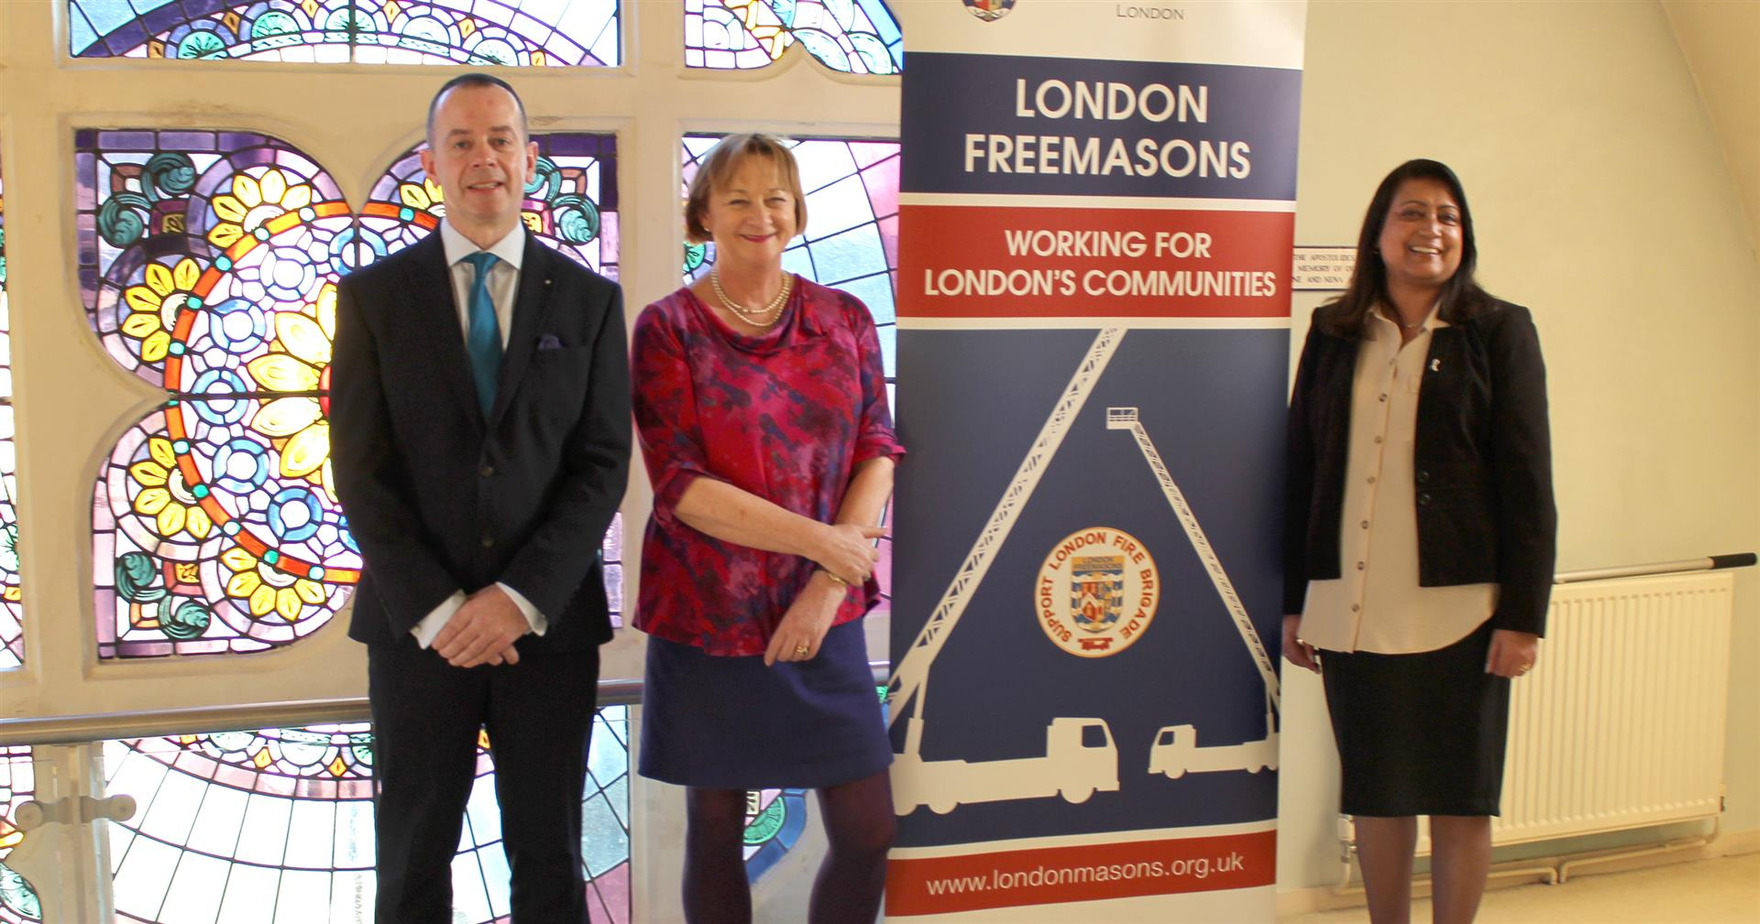 Breast cancer patients receive free financial advice thanks to London Freemasons